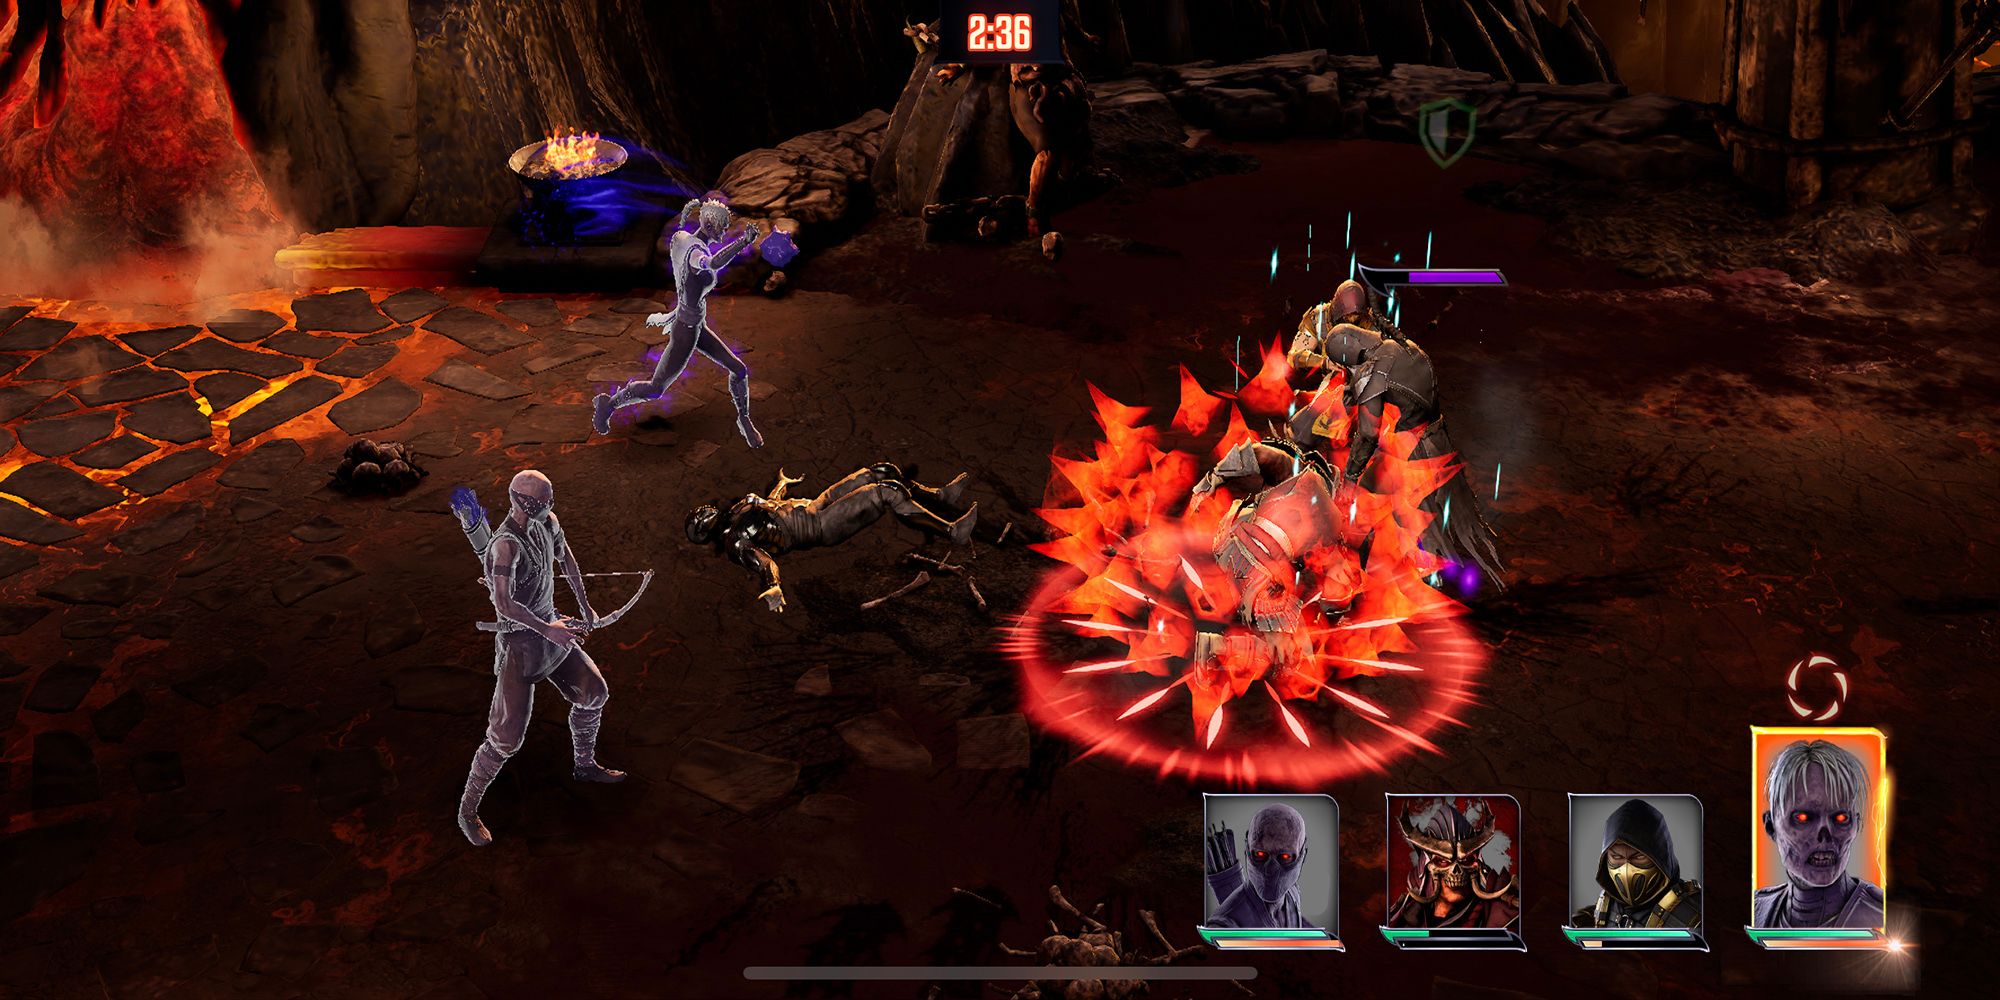 Scorpion, Shao Kahn, and a team of Neatherealm demons engage in battle in Mortal Kombat: Onslaught.